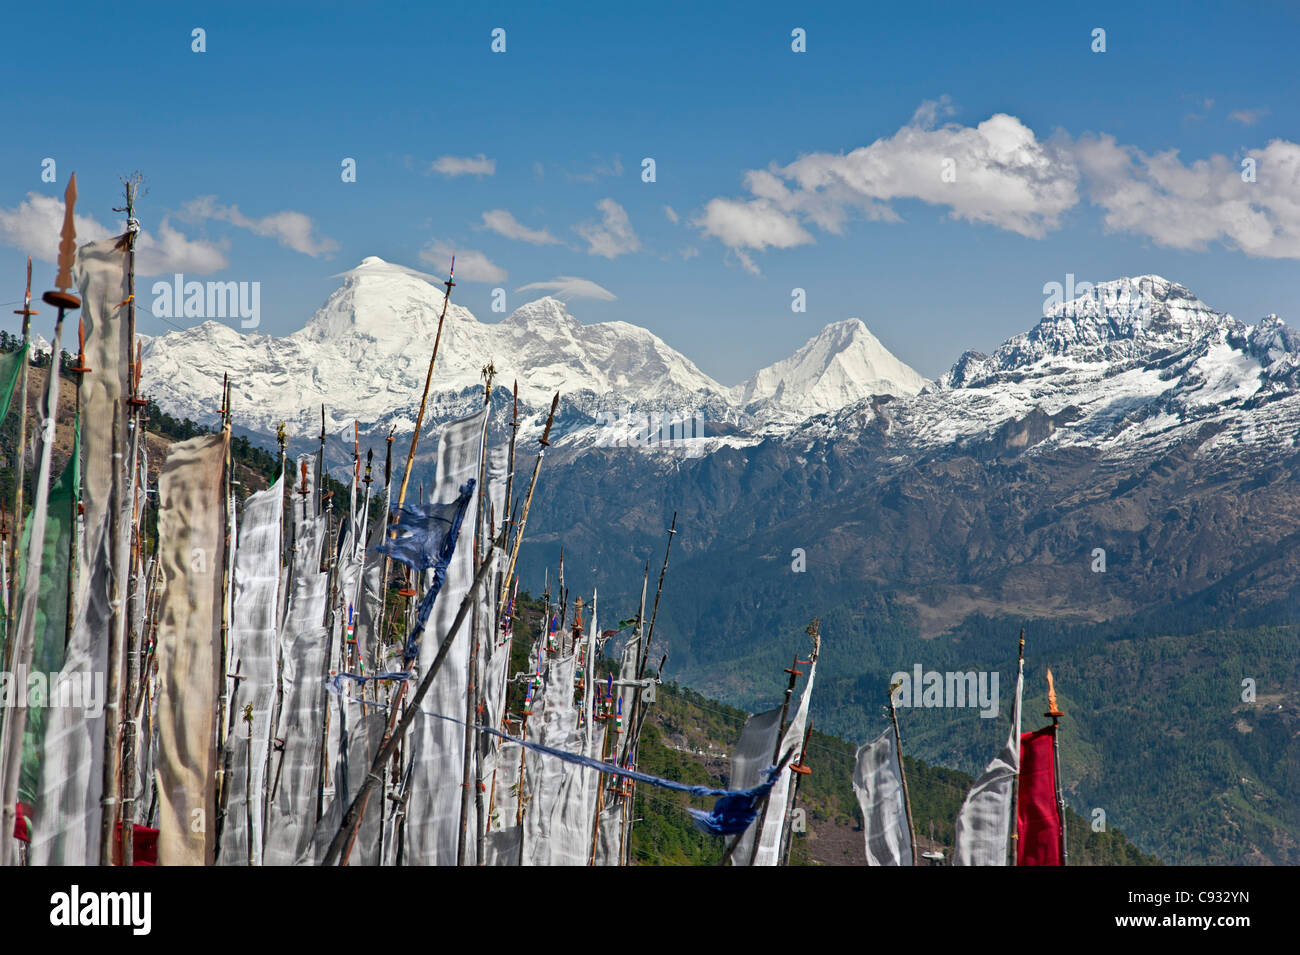 A superb view of snow-capped mountains from the Cheli La Pass, Bhutans highest motorable road. Stock Photo